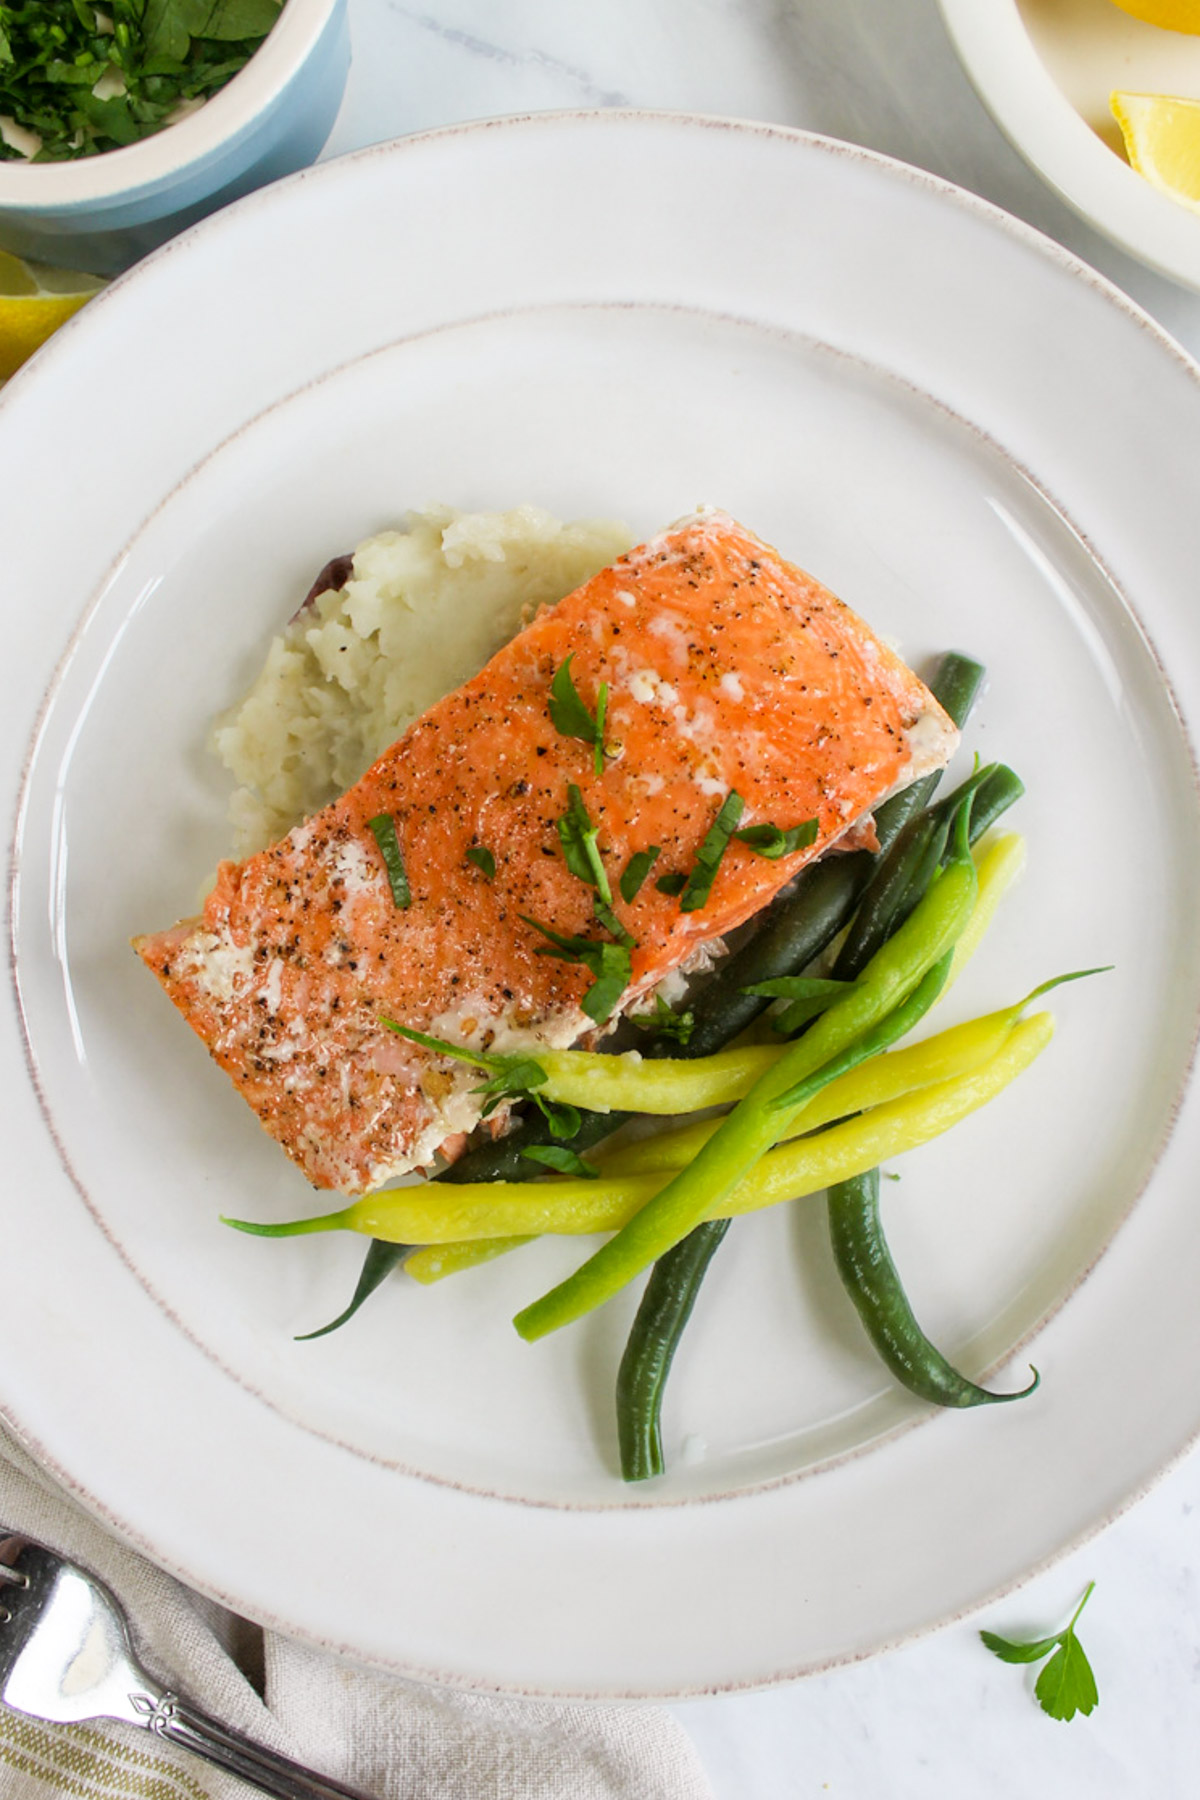 Simple Roasted Wild Caught Salmon with mashed potatoes and green beans.